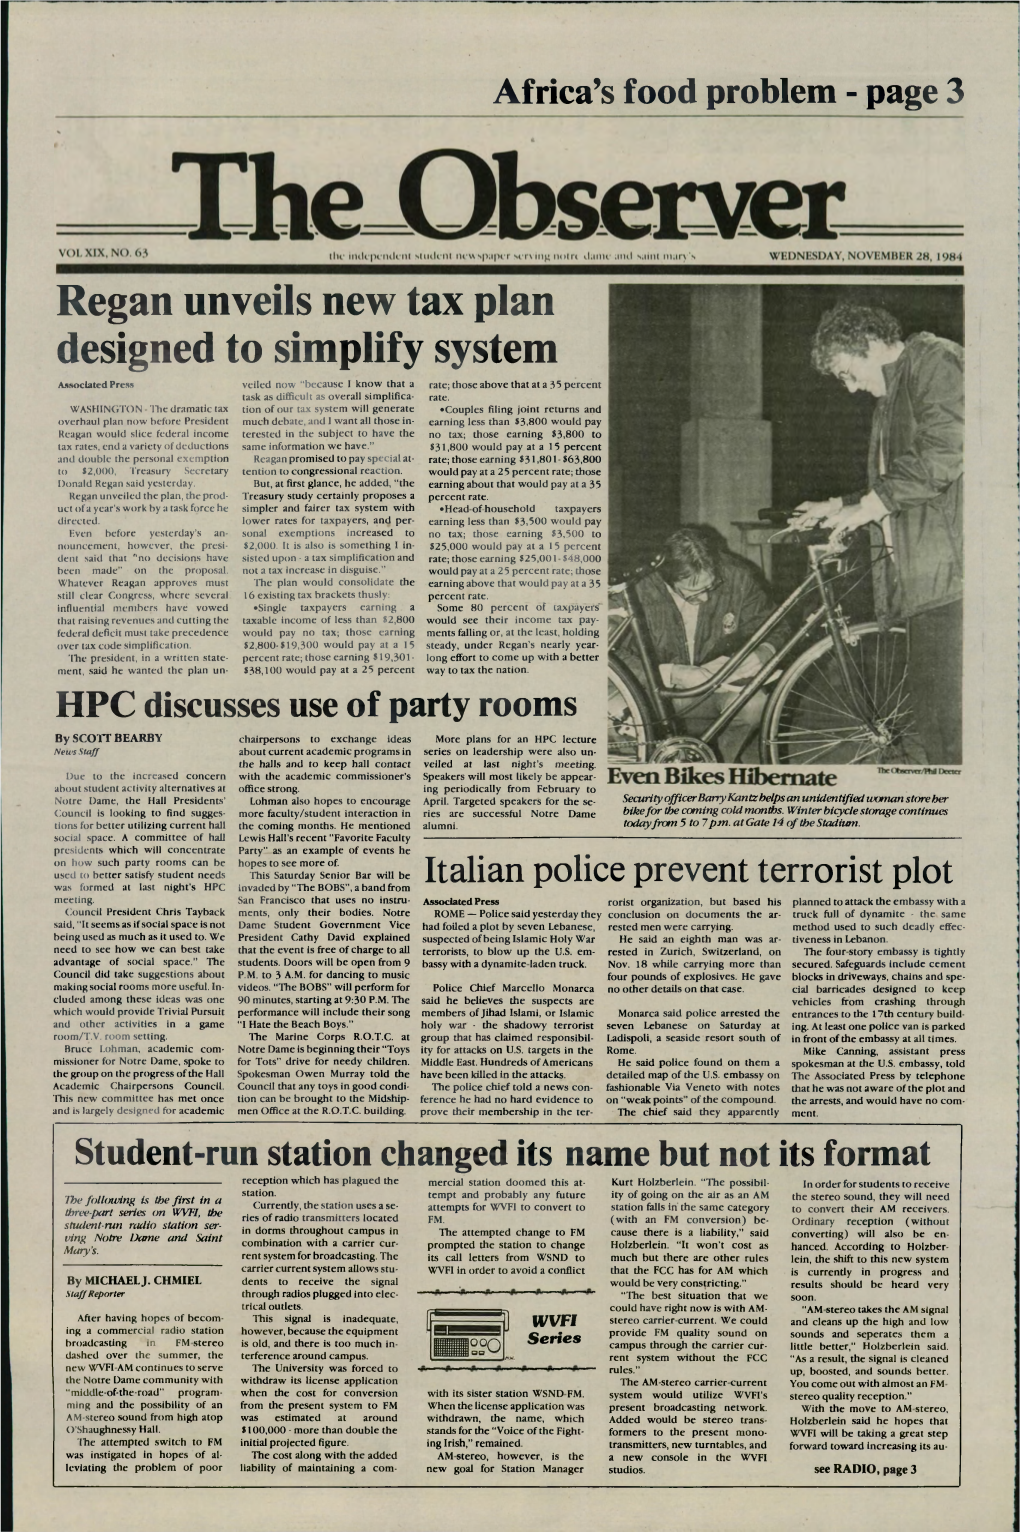 The Observer Wednesday, November 28,1984 — Page 2 in Brief Twelve Years Later We Are Still ‘Drifting Through Transition’ the U.S